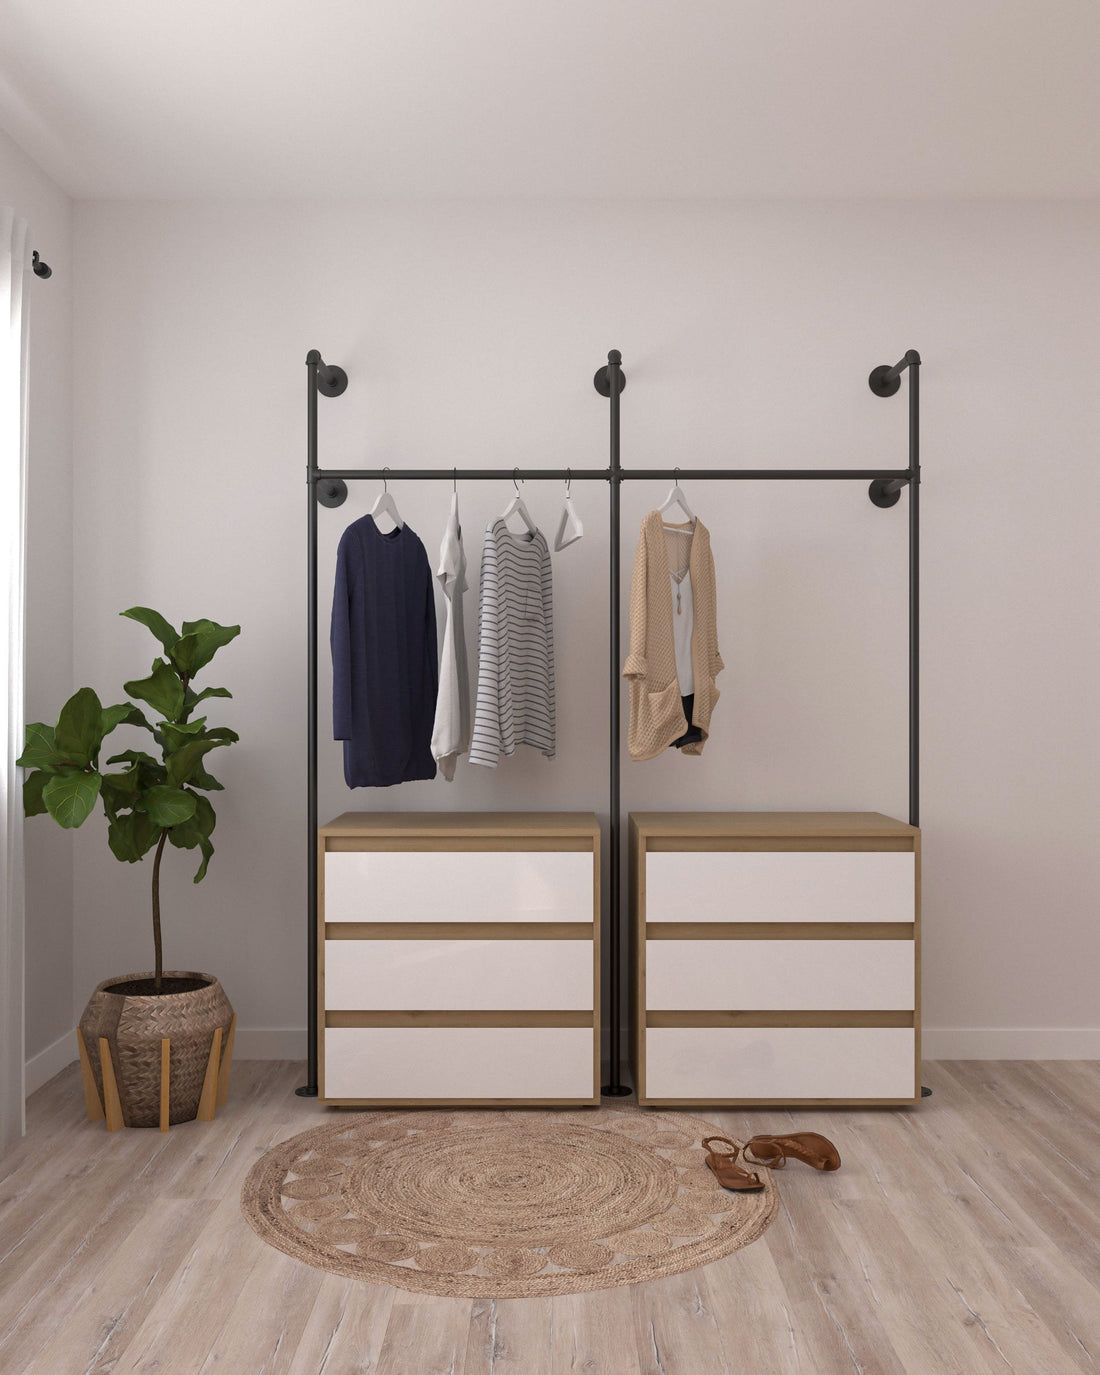 Glide Pipe Garment Rack wall-mounted, showcasing its industrial design and functionality for hanging clothing